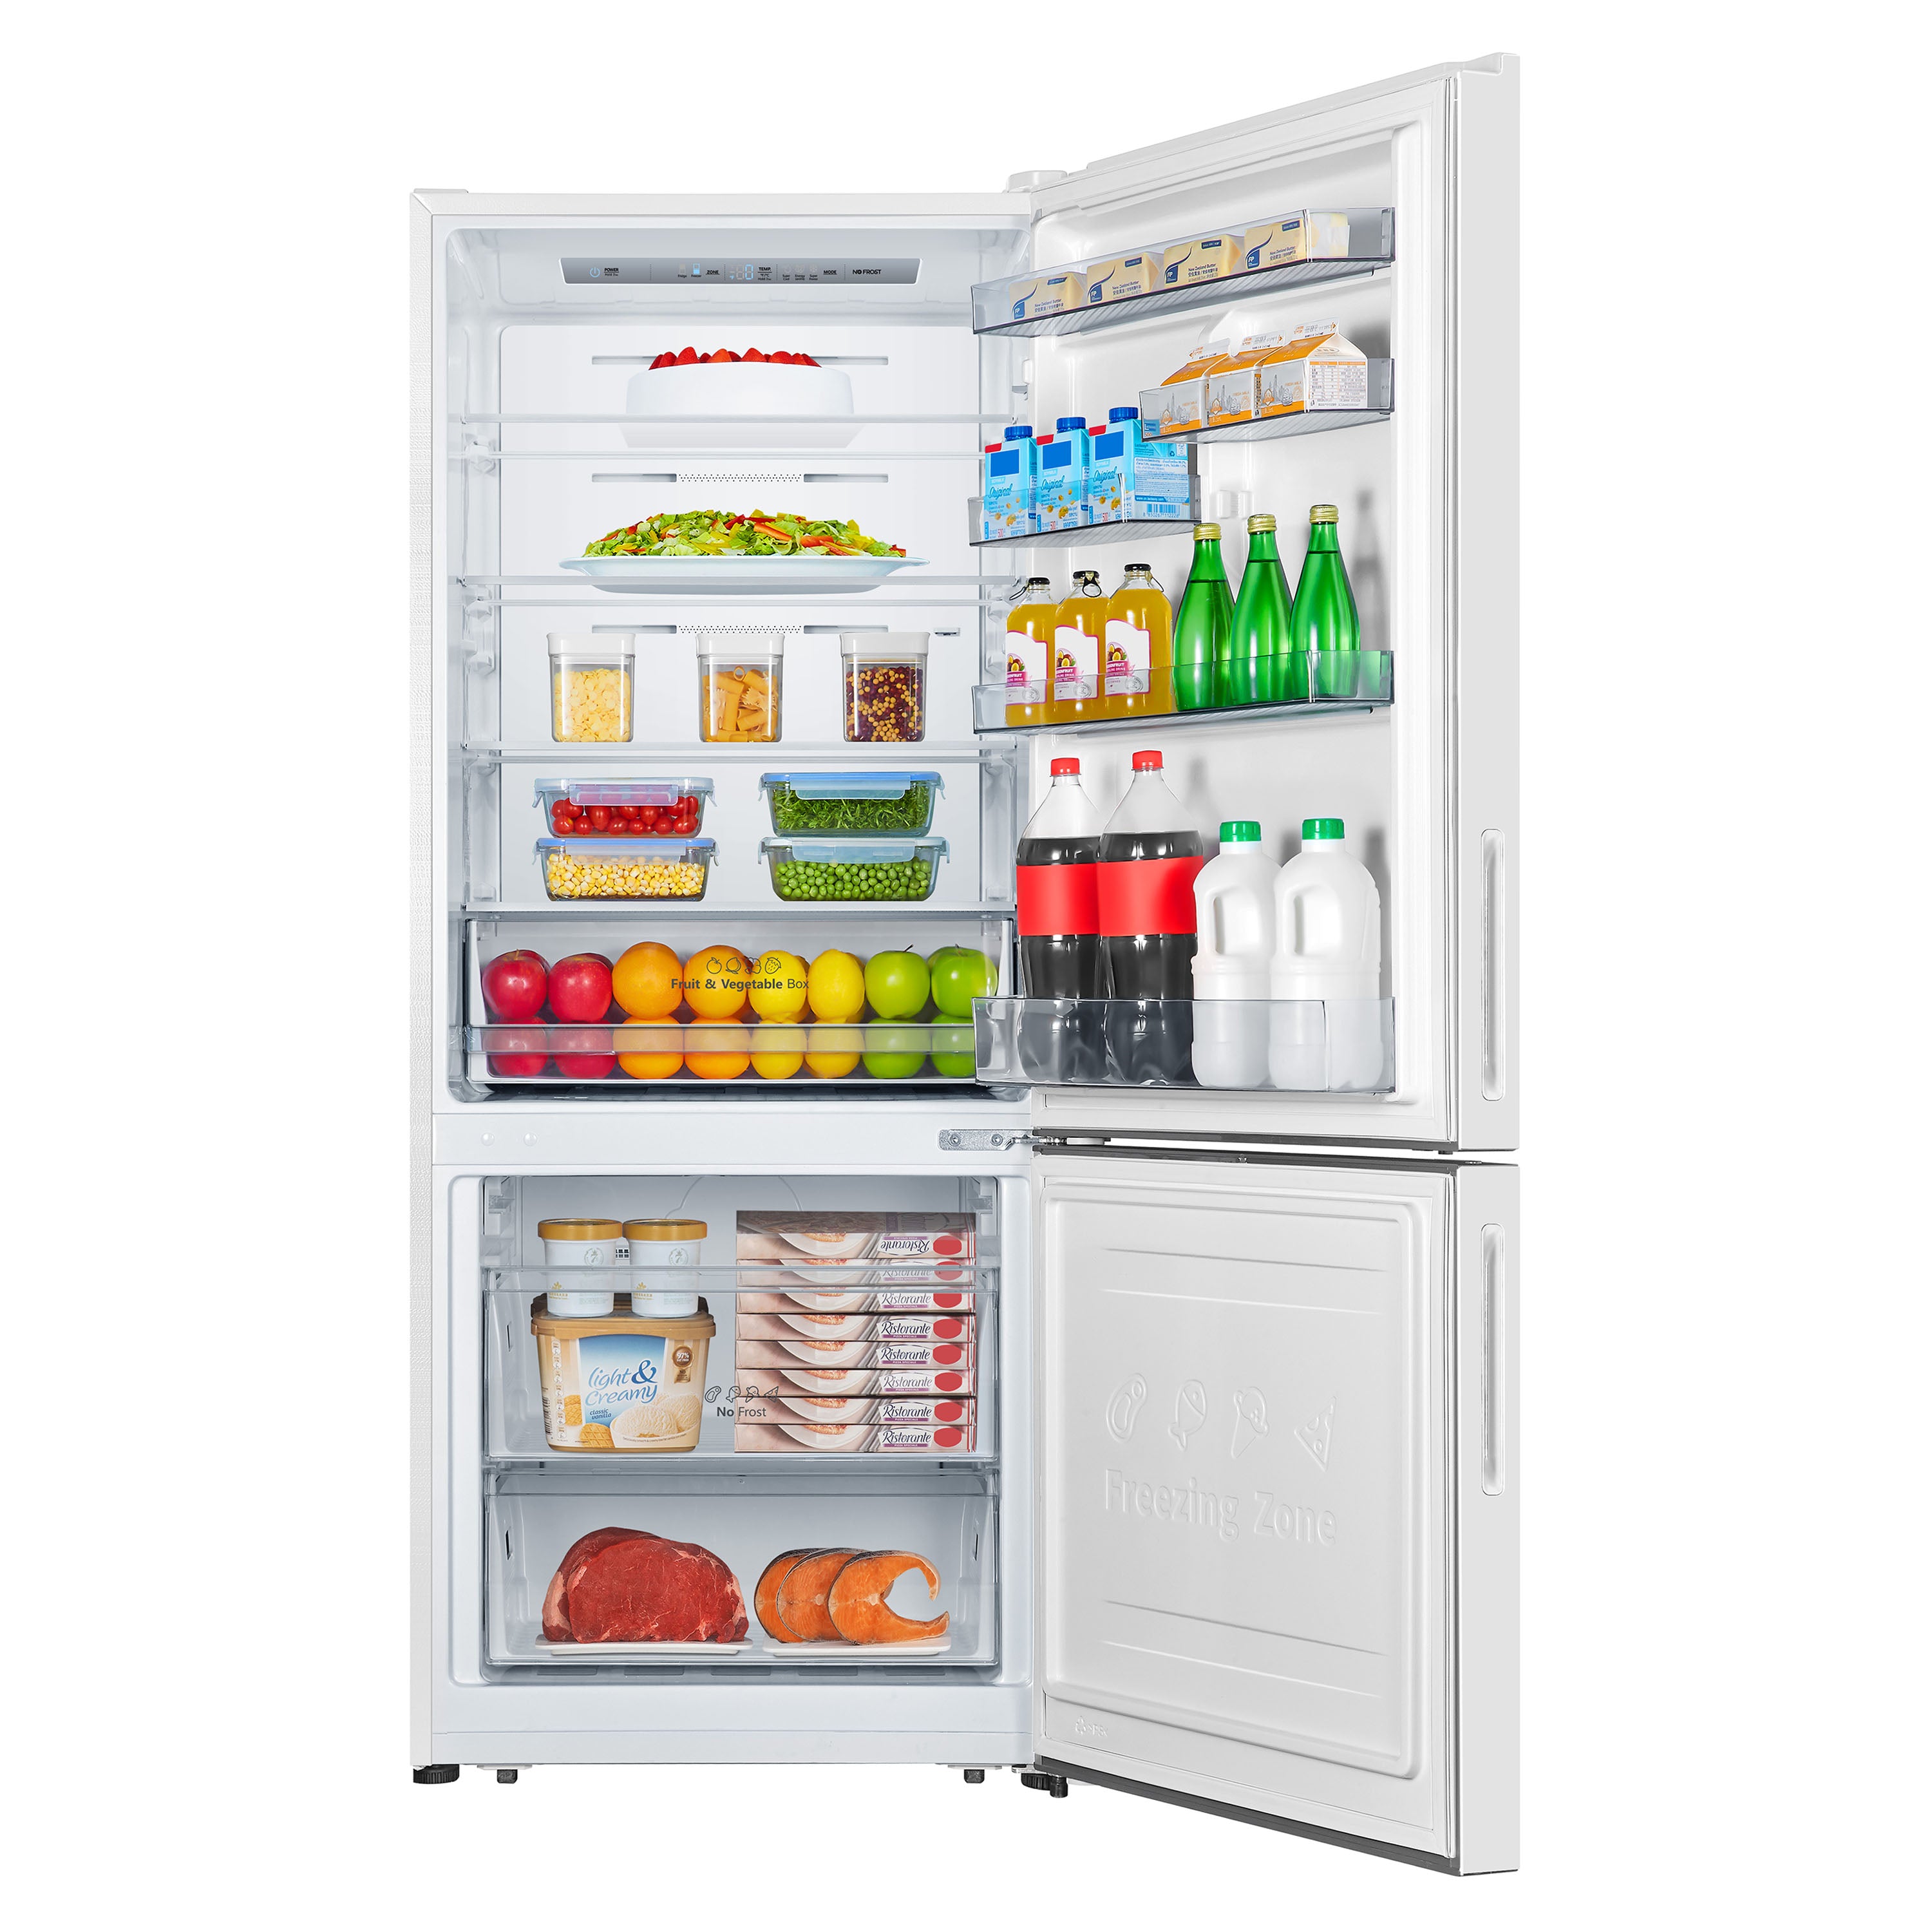 Hisense - 27.7 Inch 14.7 cu. ft Bottom Mount Refrigerator in White - RB15A2CWE